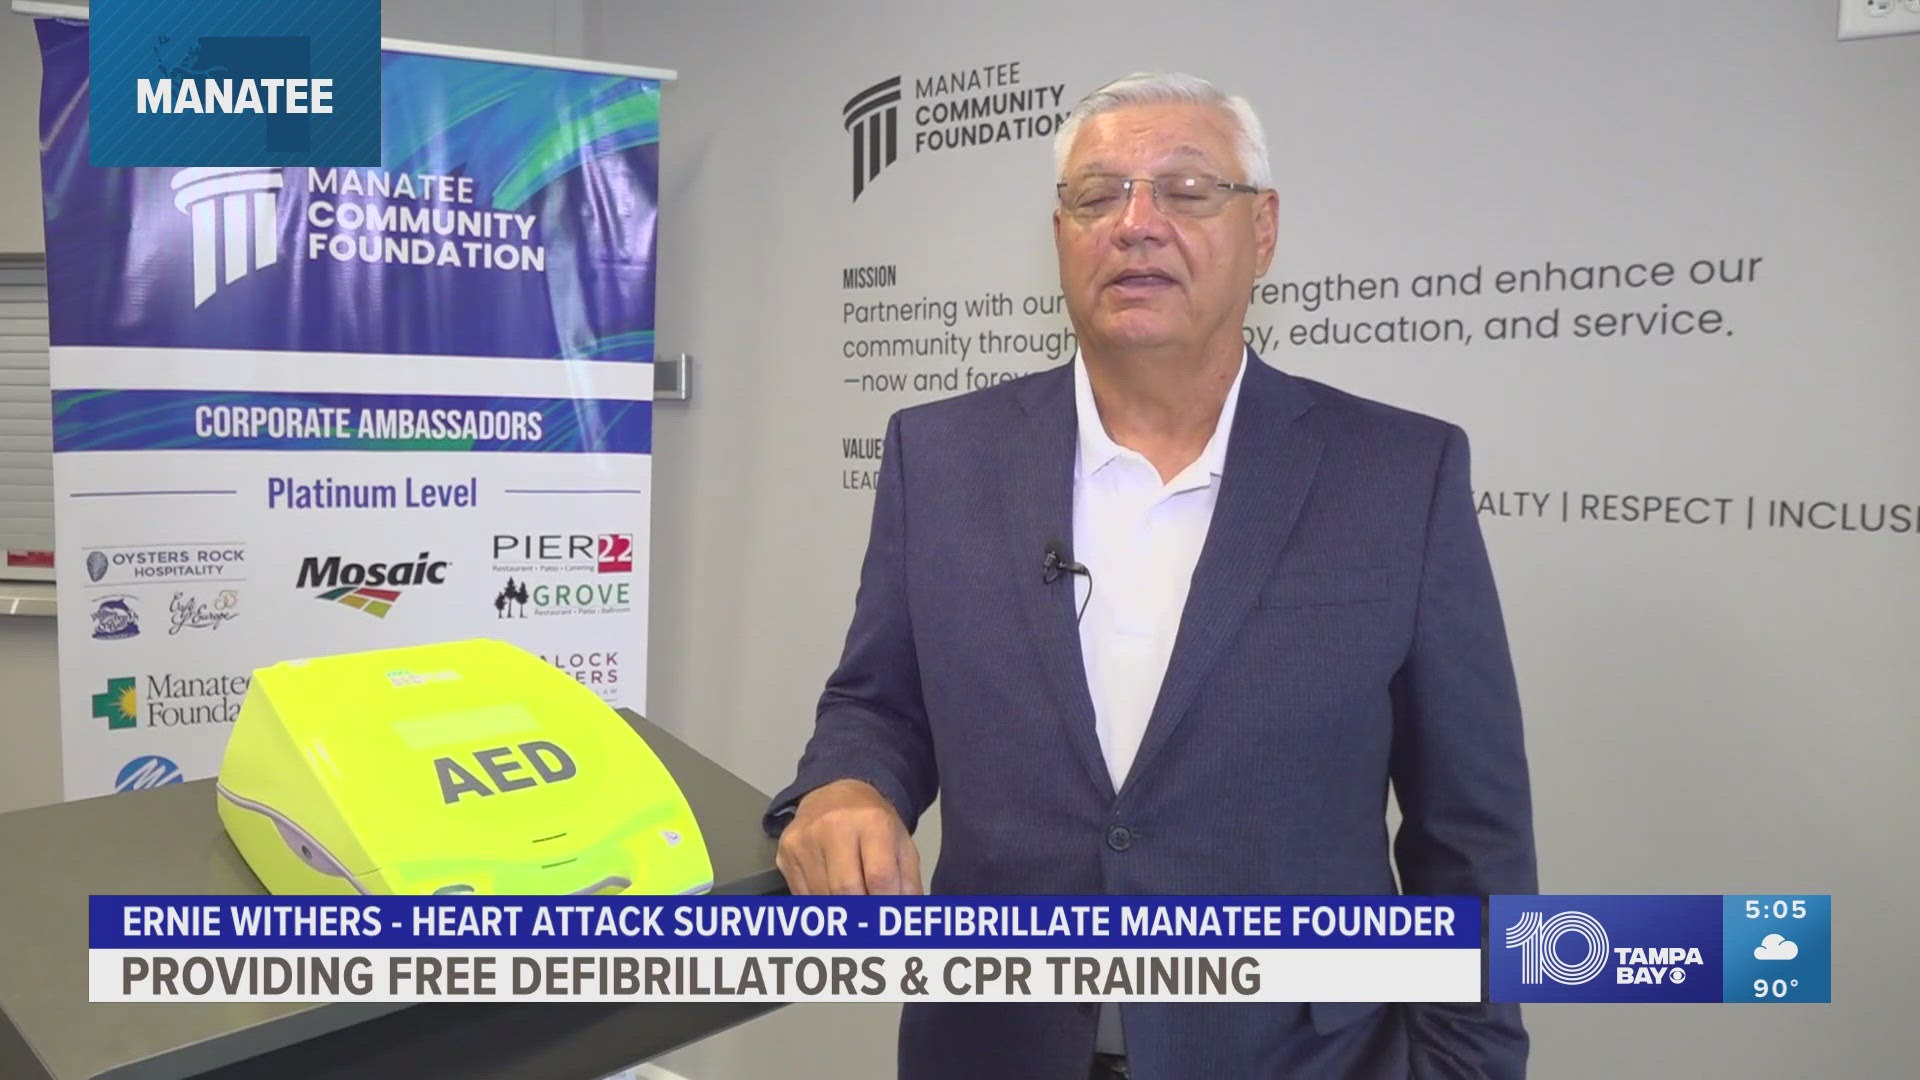 Ernie Withers suffered seven cardiac arrests. He founded Defibrillate Manatee to train non-profits on how to use an AED machine, as well as handing out free AEDs.